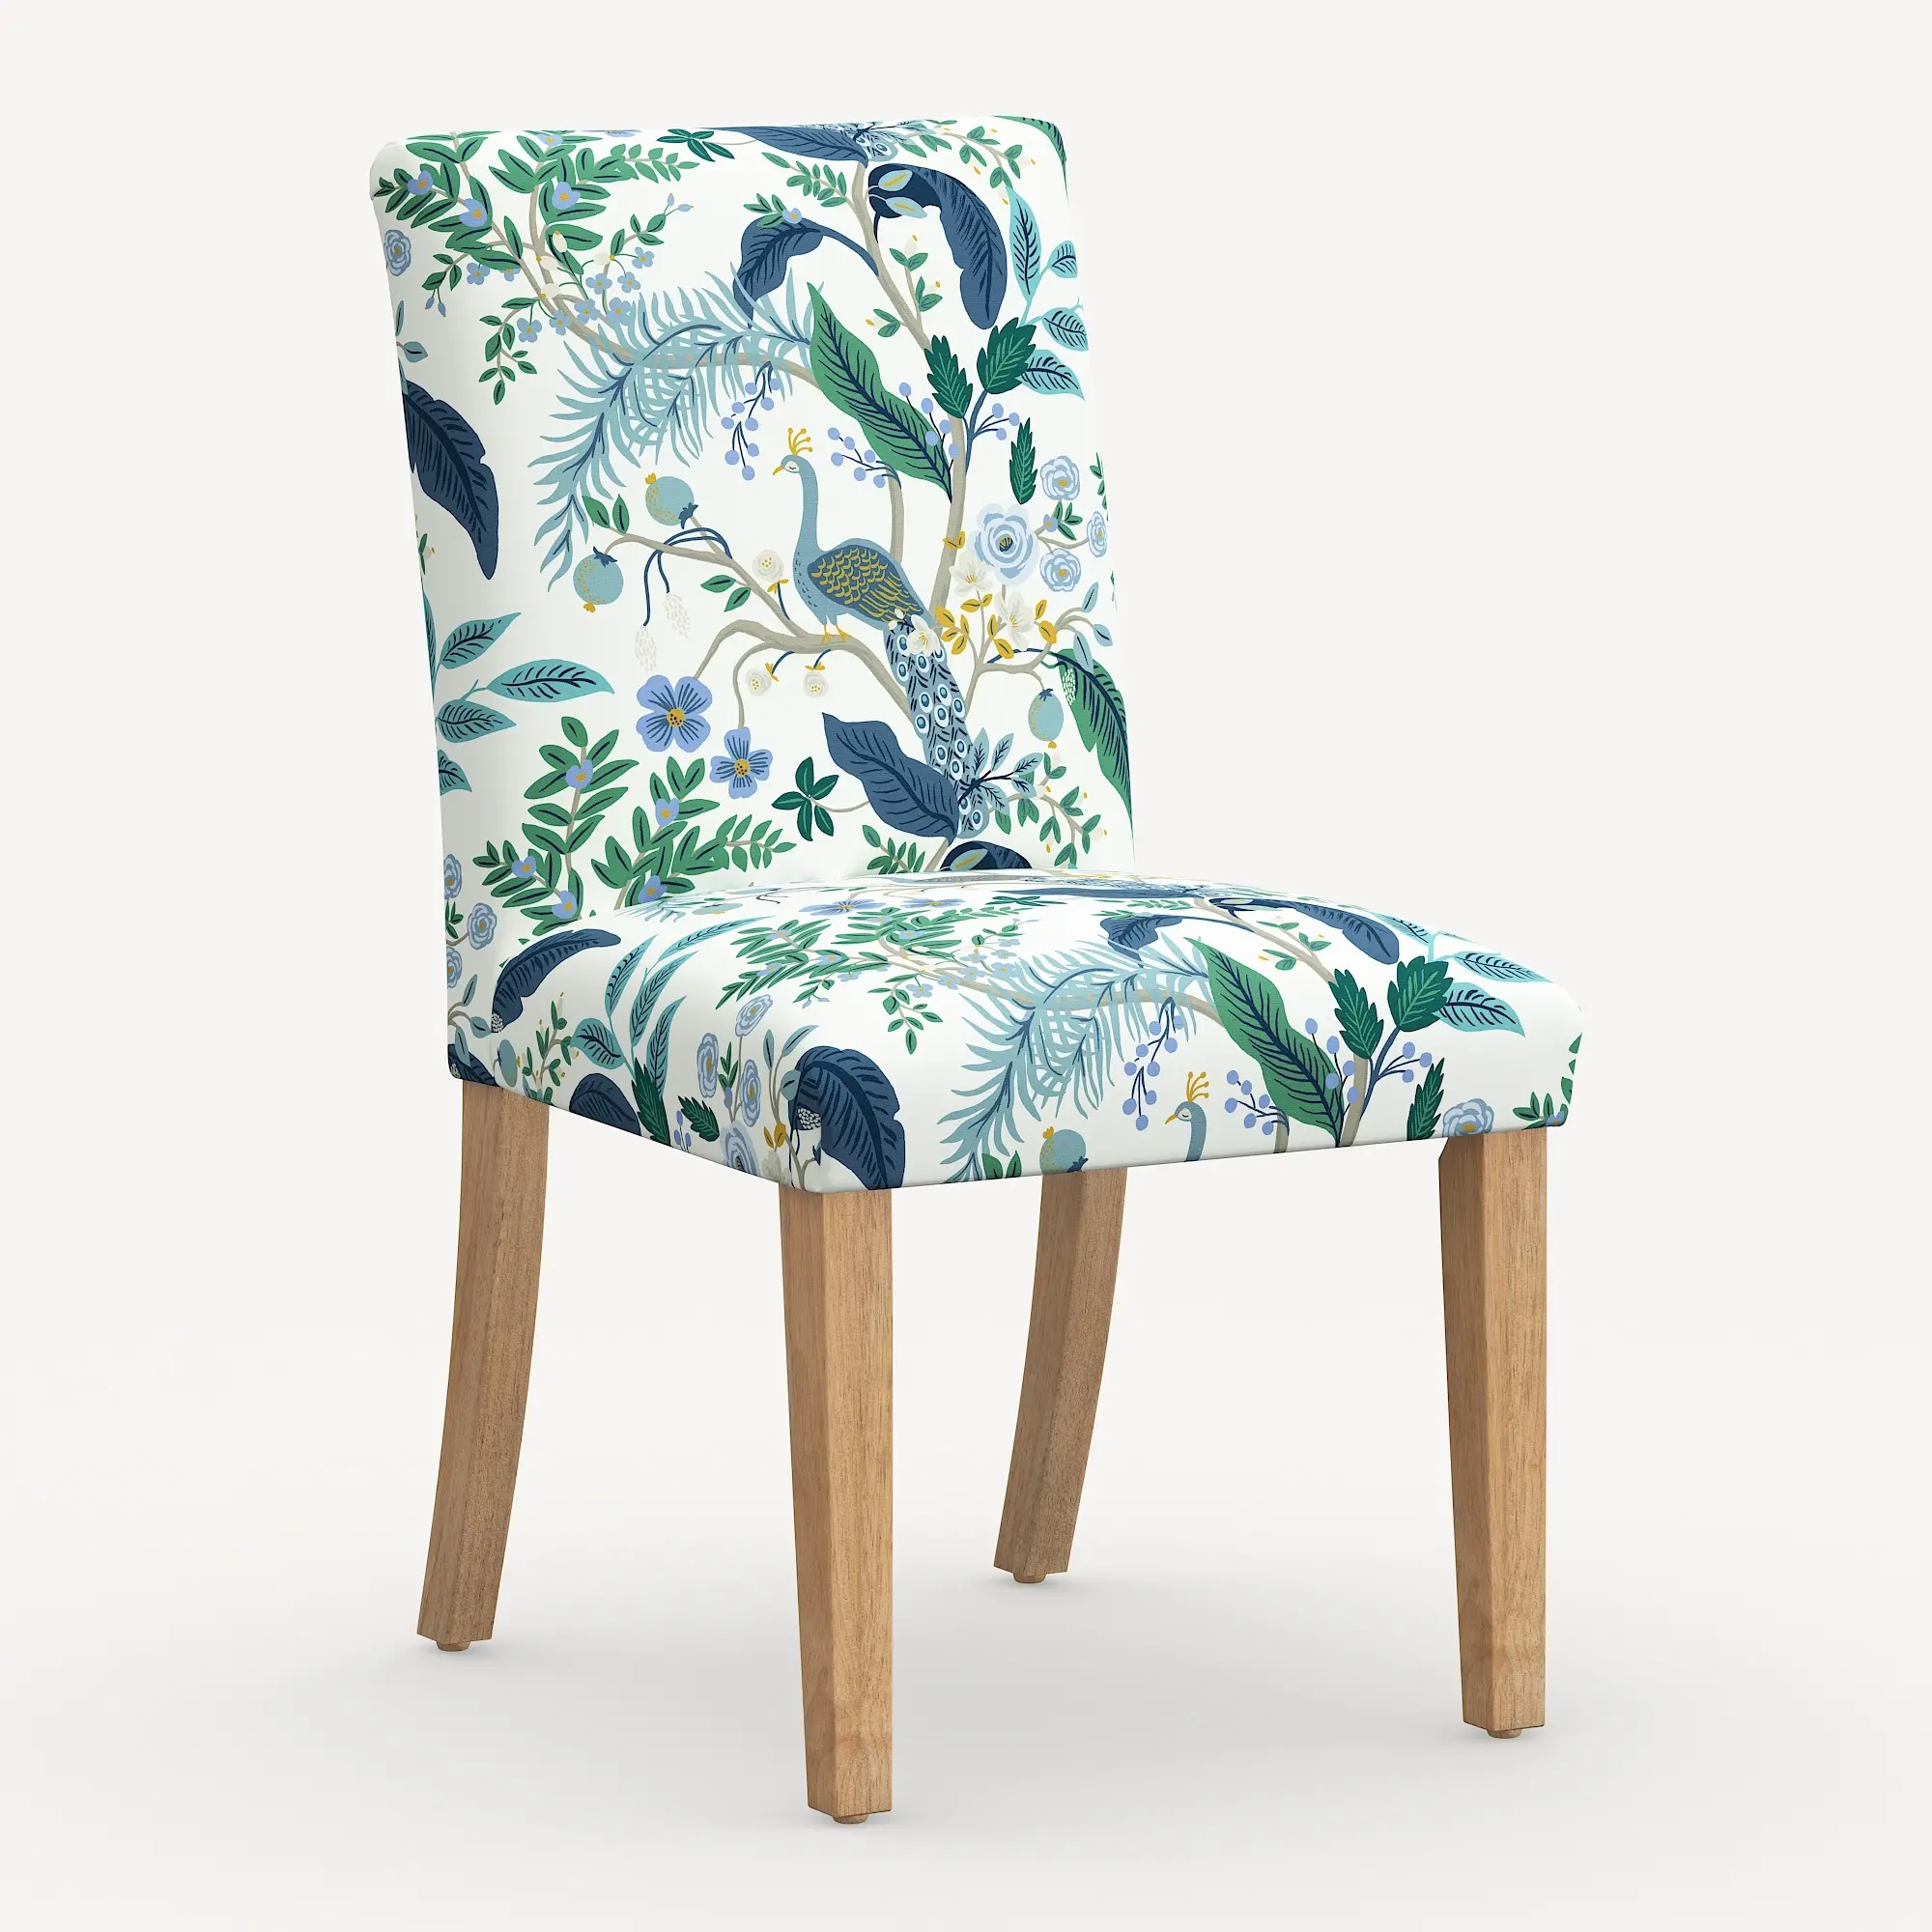 Rifle Paper Co. Lorraine Blue Peacock Dining Chair